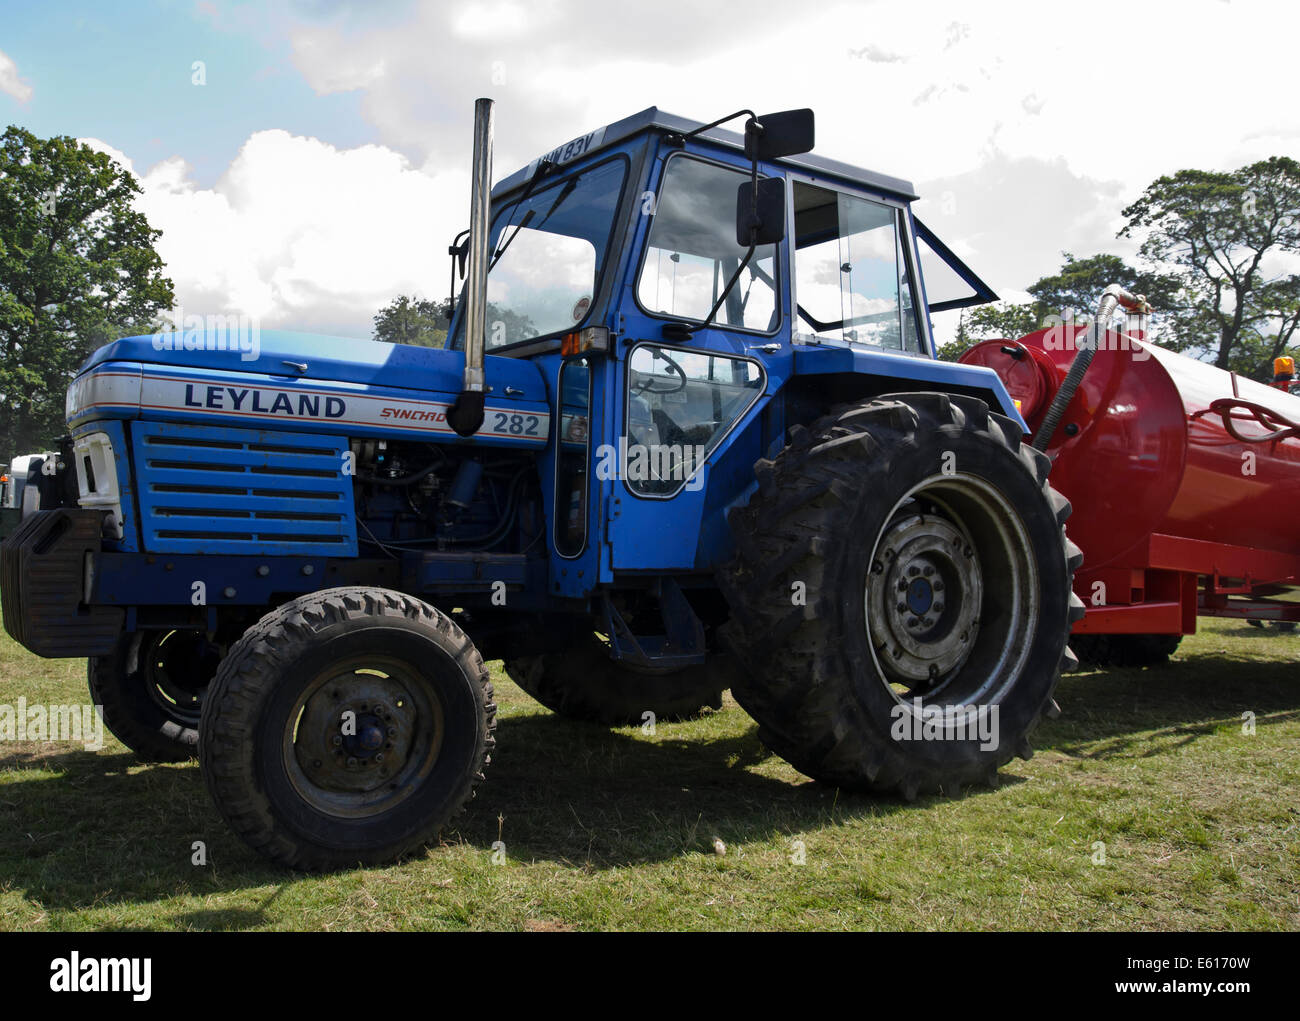 leyland synchro 282 vintage tractor and bowser Stock Photo